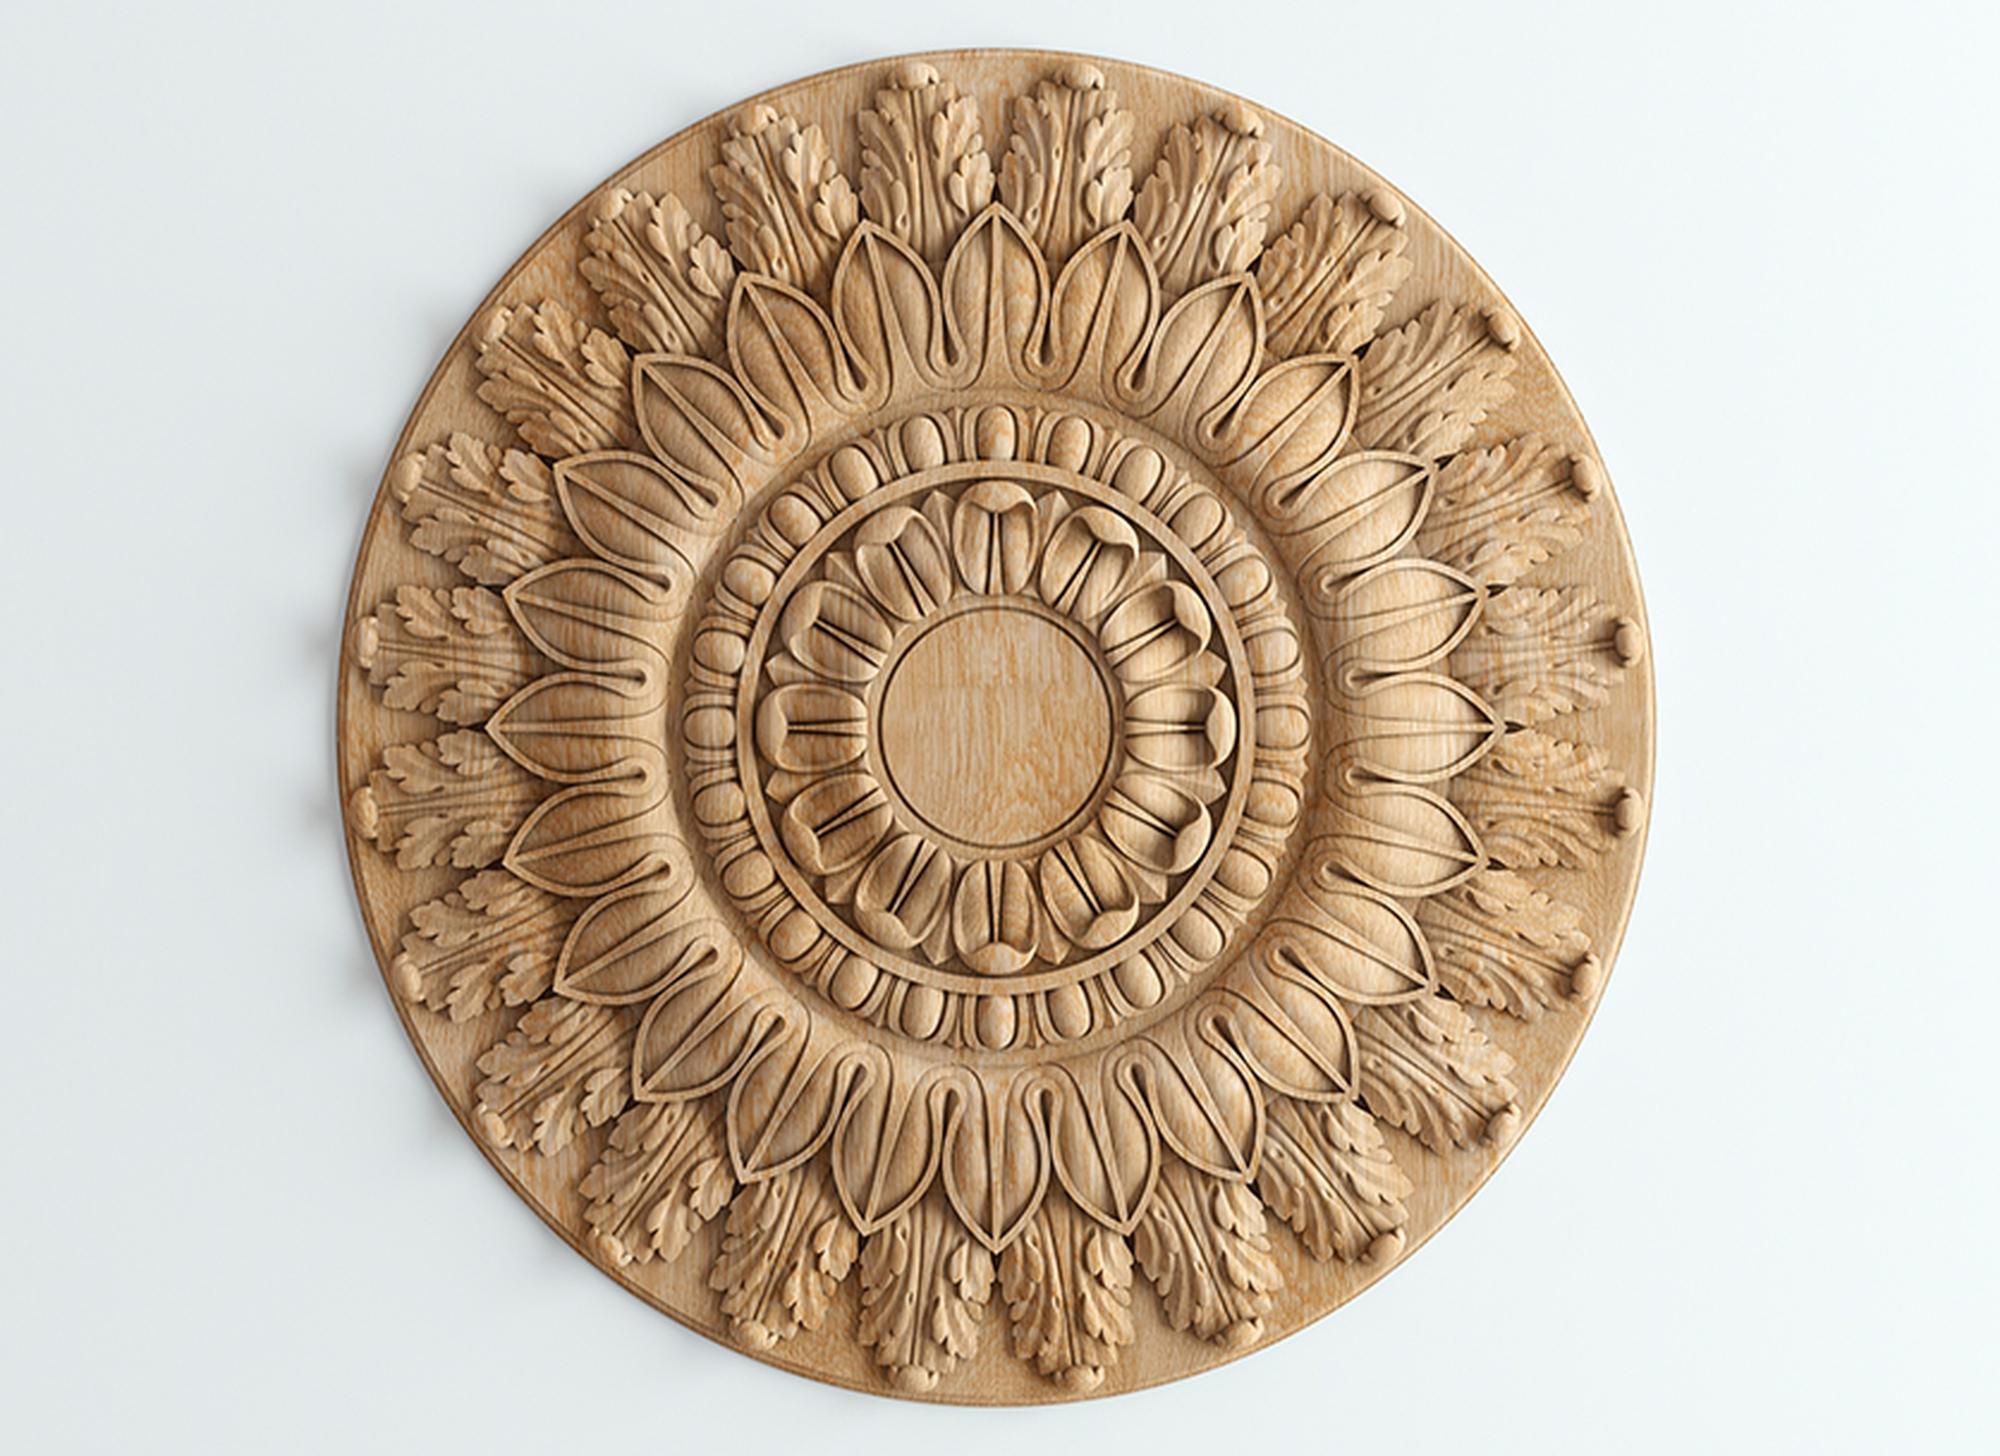 Set of 4 high-quality hand carved wood rosettes from oak or beech of your choice.

>> SKU: R-022

>> Dimensions (A x B x C):

1) 13.78